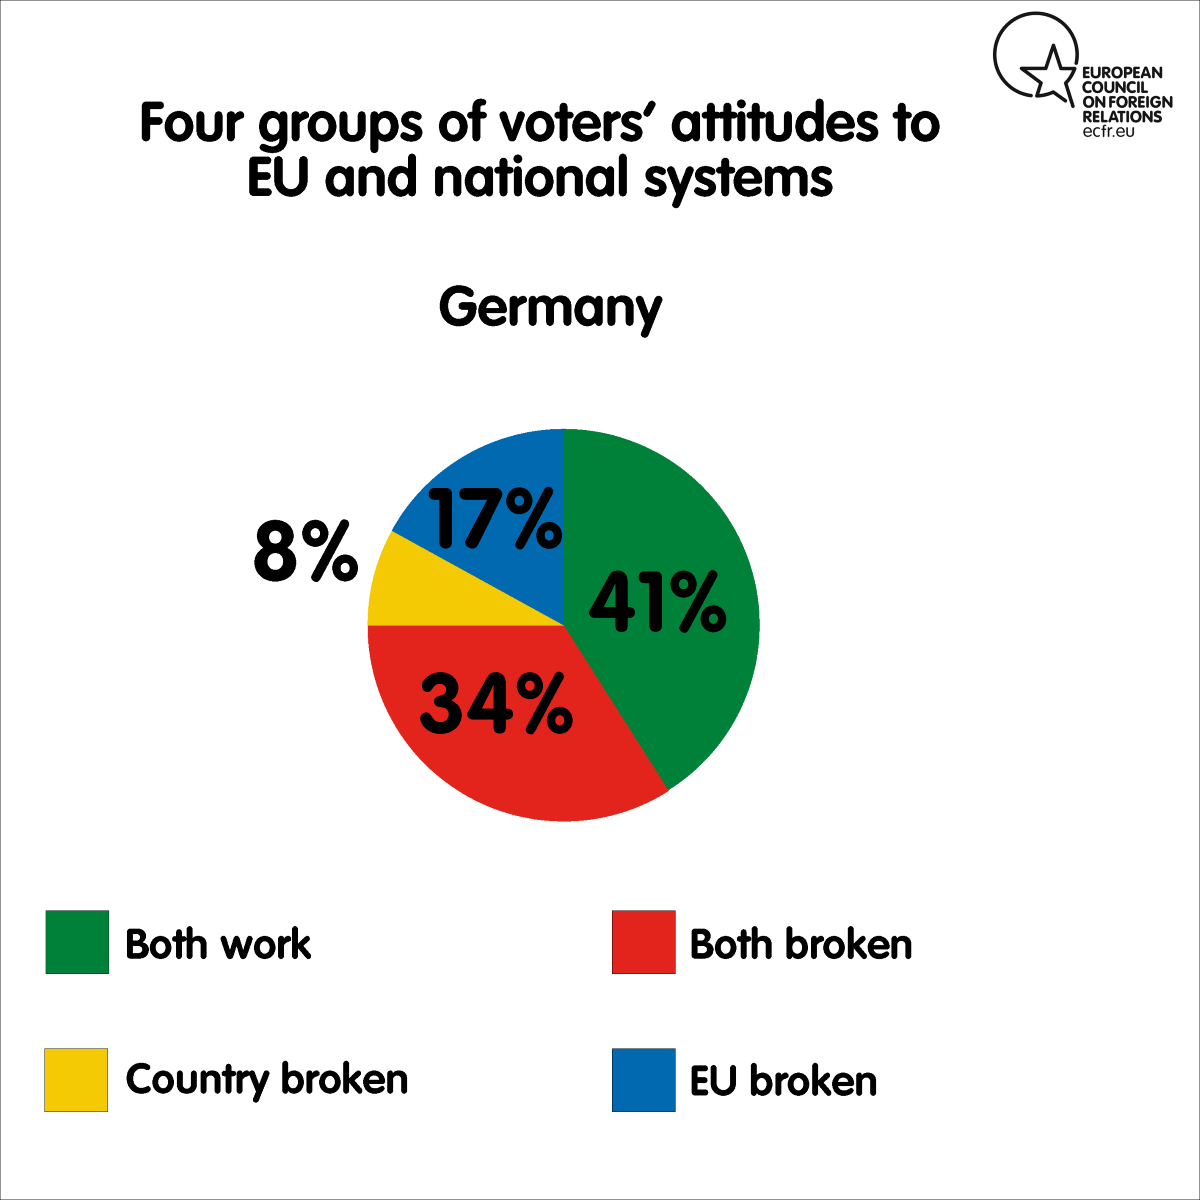 Four groups of voters’ attitudes to EU and national systems in Germany